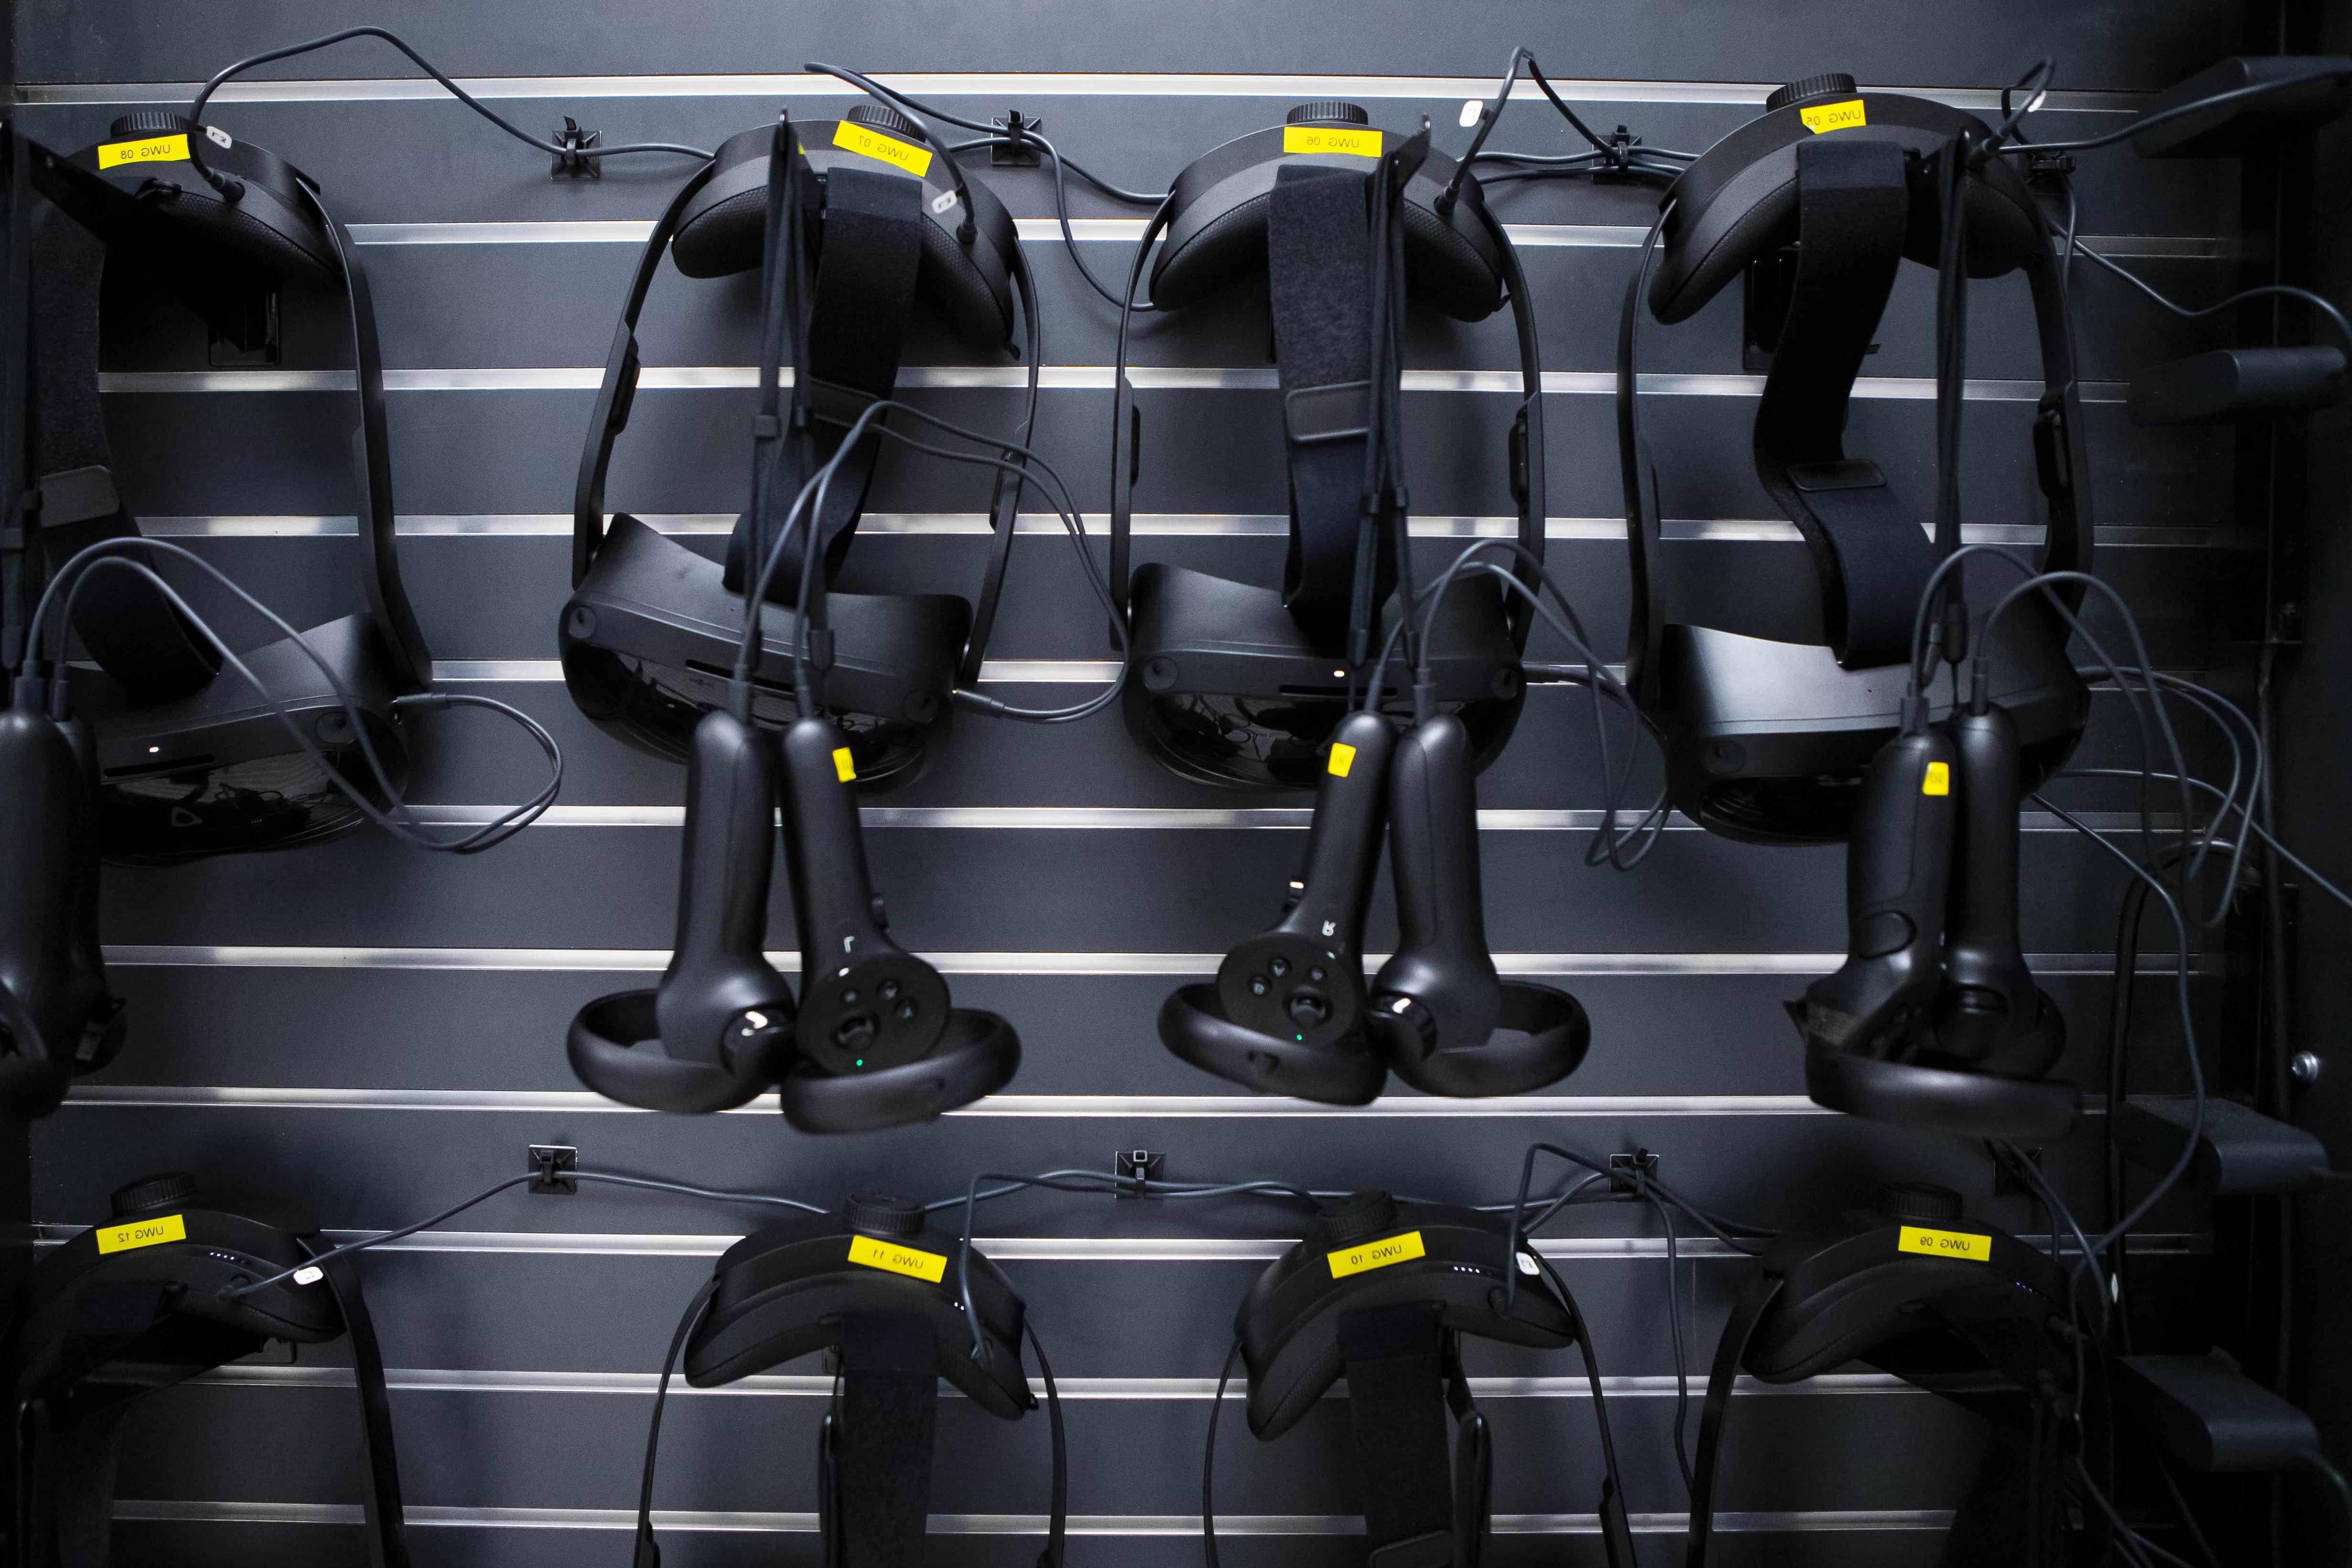 Virtual reality headsets hanging on a wall.